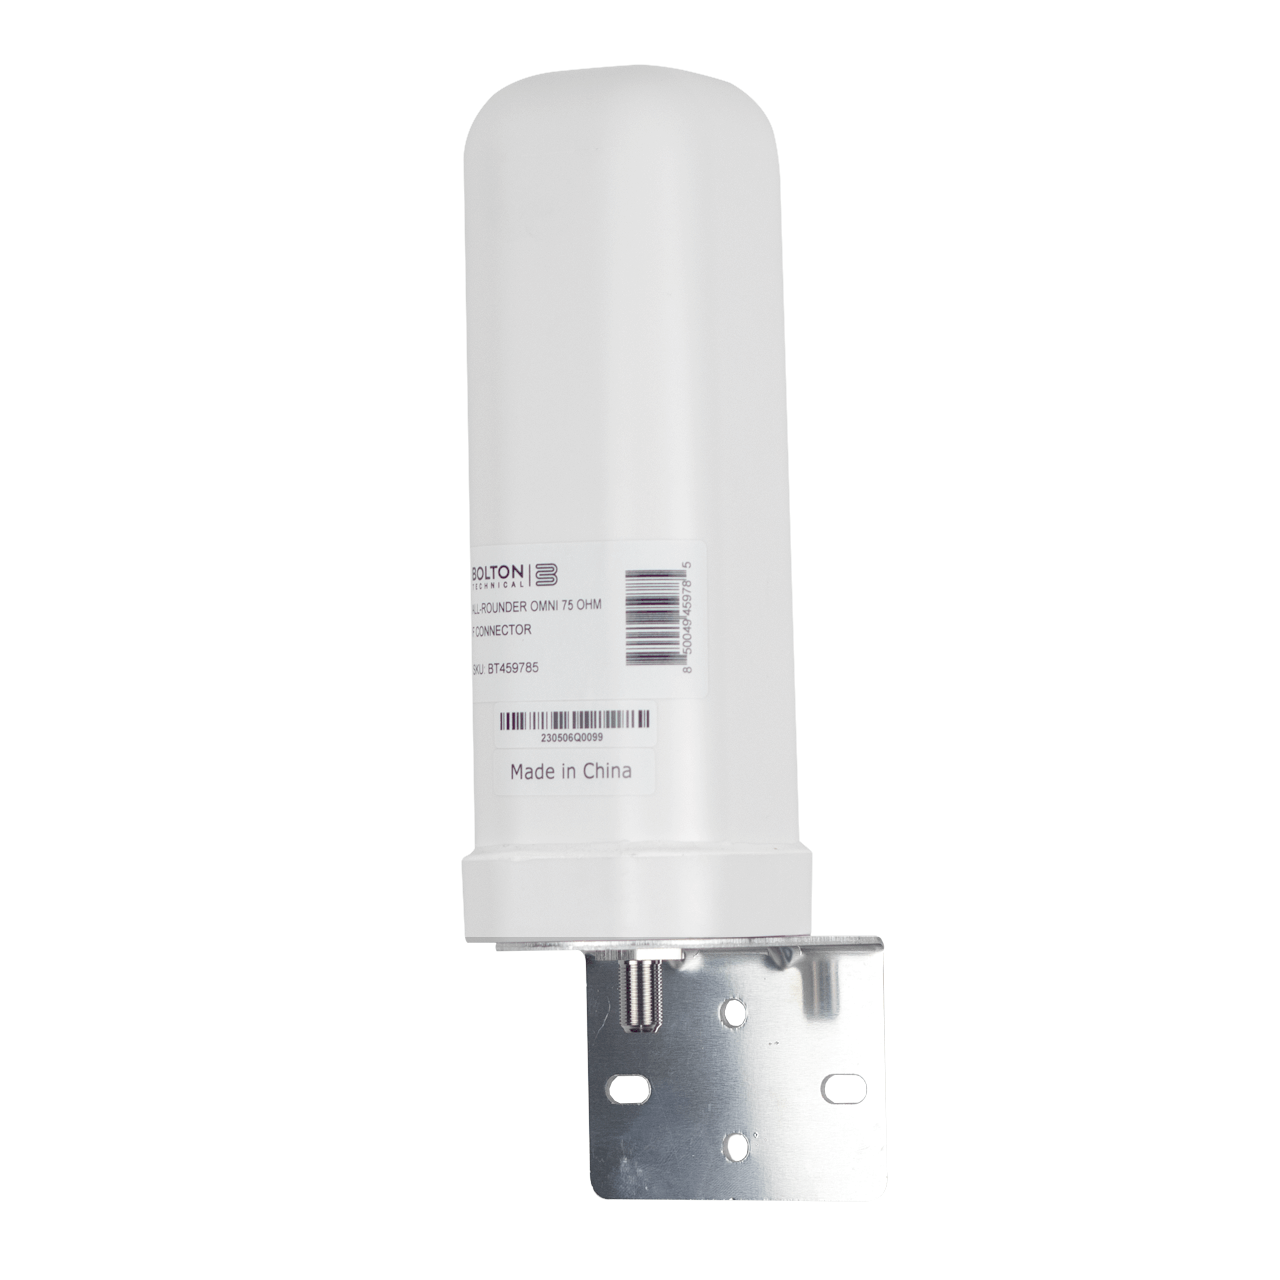 Bolton Tech The All Rounder or Bolton Technical Omni-Directional Cellular Antenna, 698-2700 MHz, F-Female